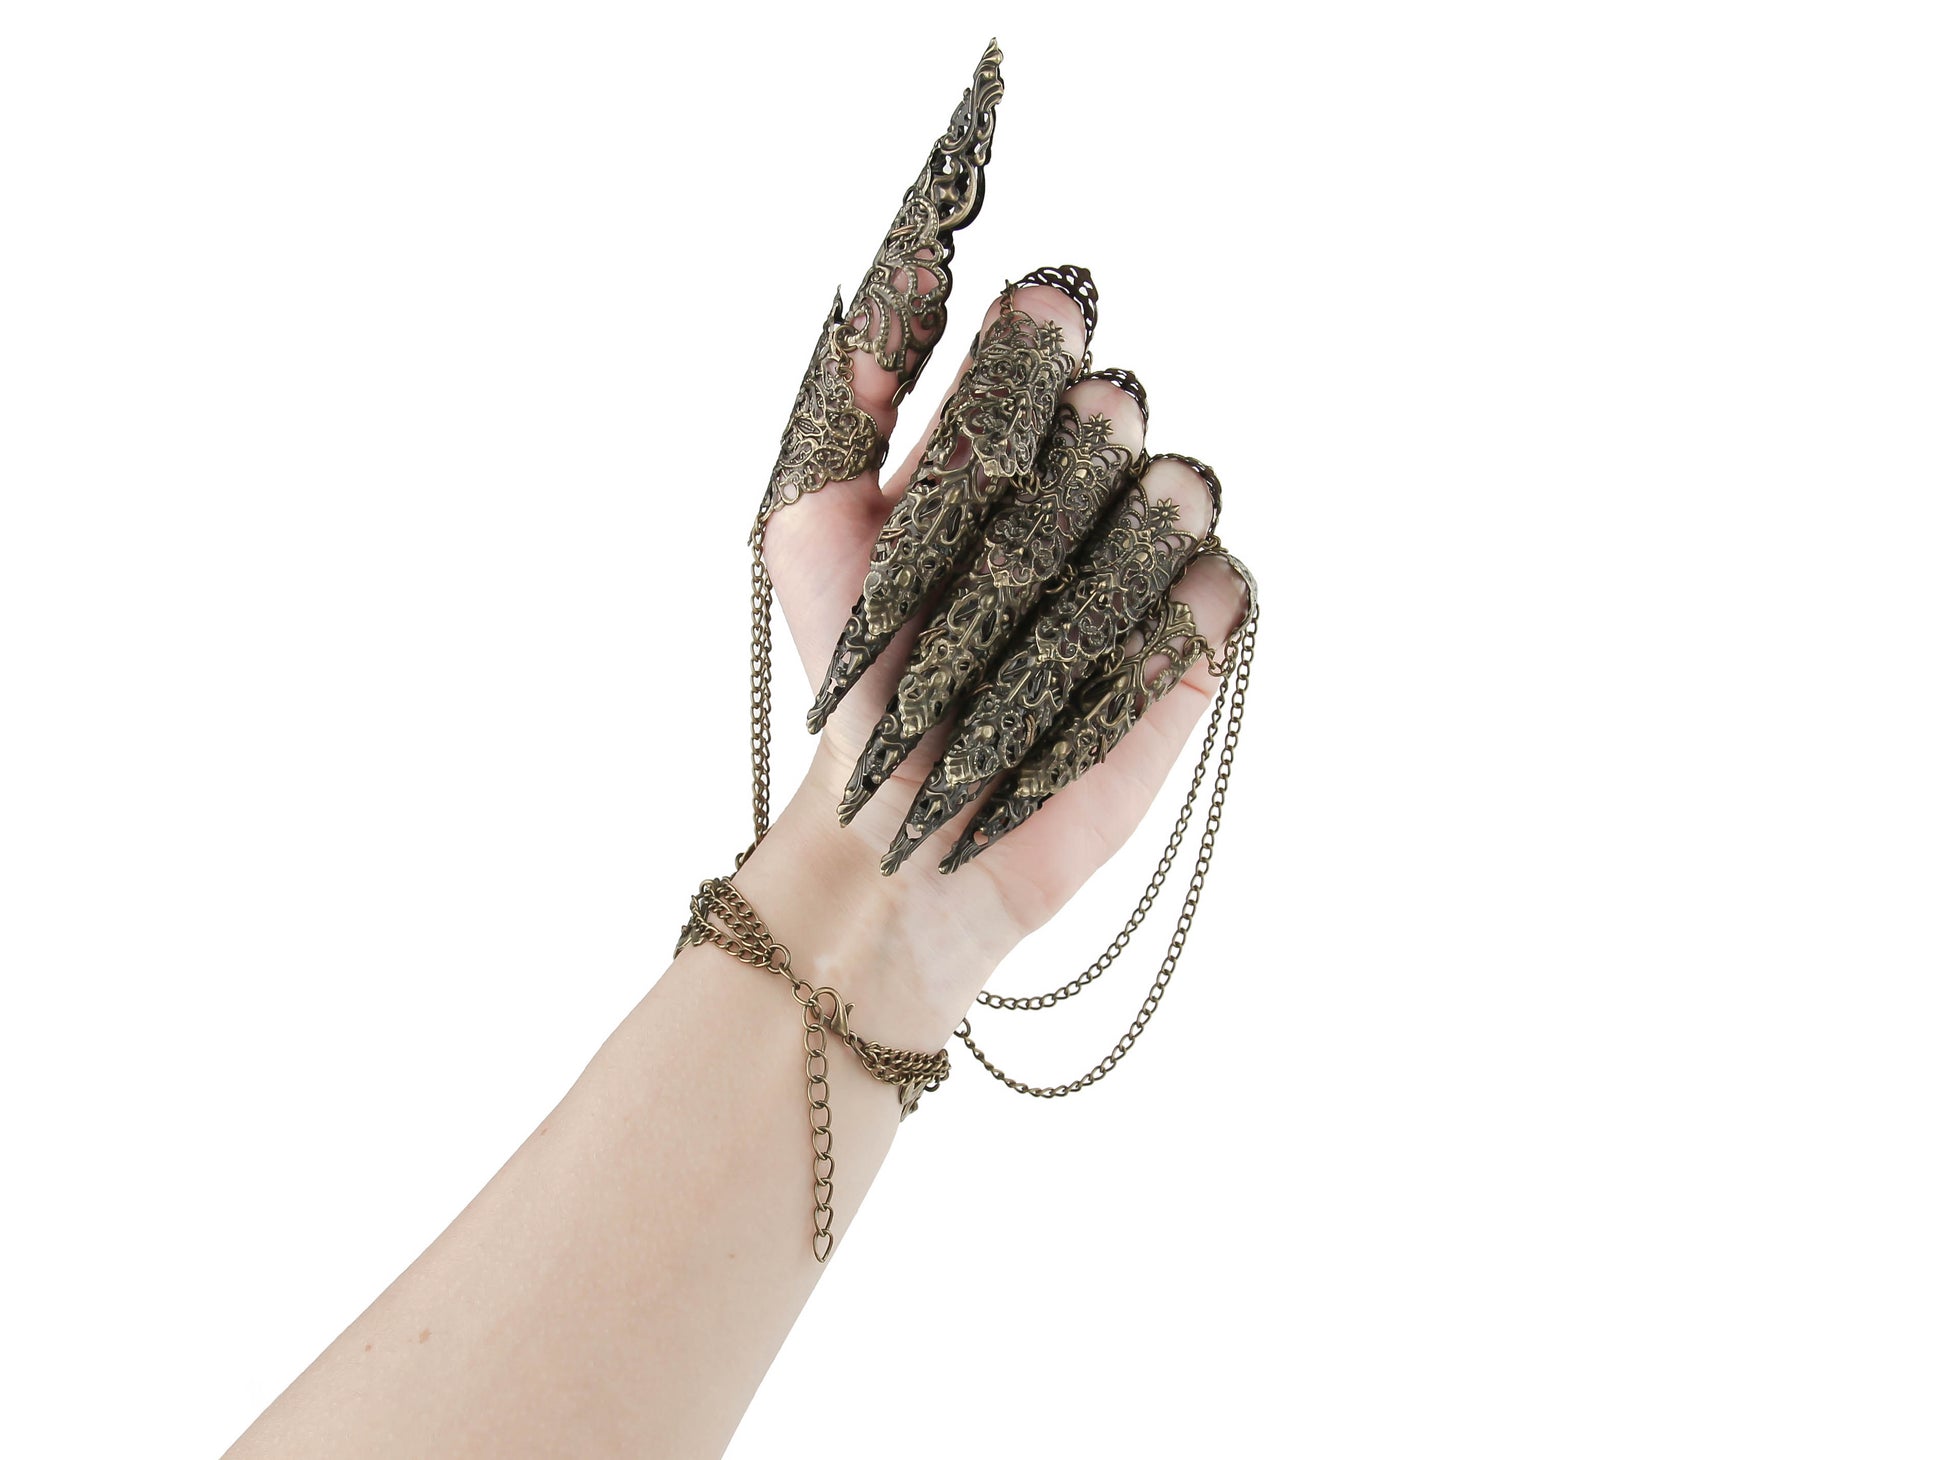 A hand dons a Myril Jewels bronze metal glove with long full finger claw rings, creating a stunning neo-gothic statement. This bold accessory, designed for the dark avant-garde enthusiast, is ideal for adding a whimsical yet edgy touch to gothic-chic, witchcore, or minimal goth attire.